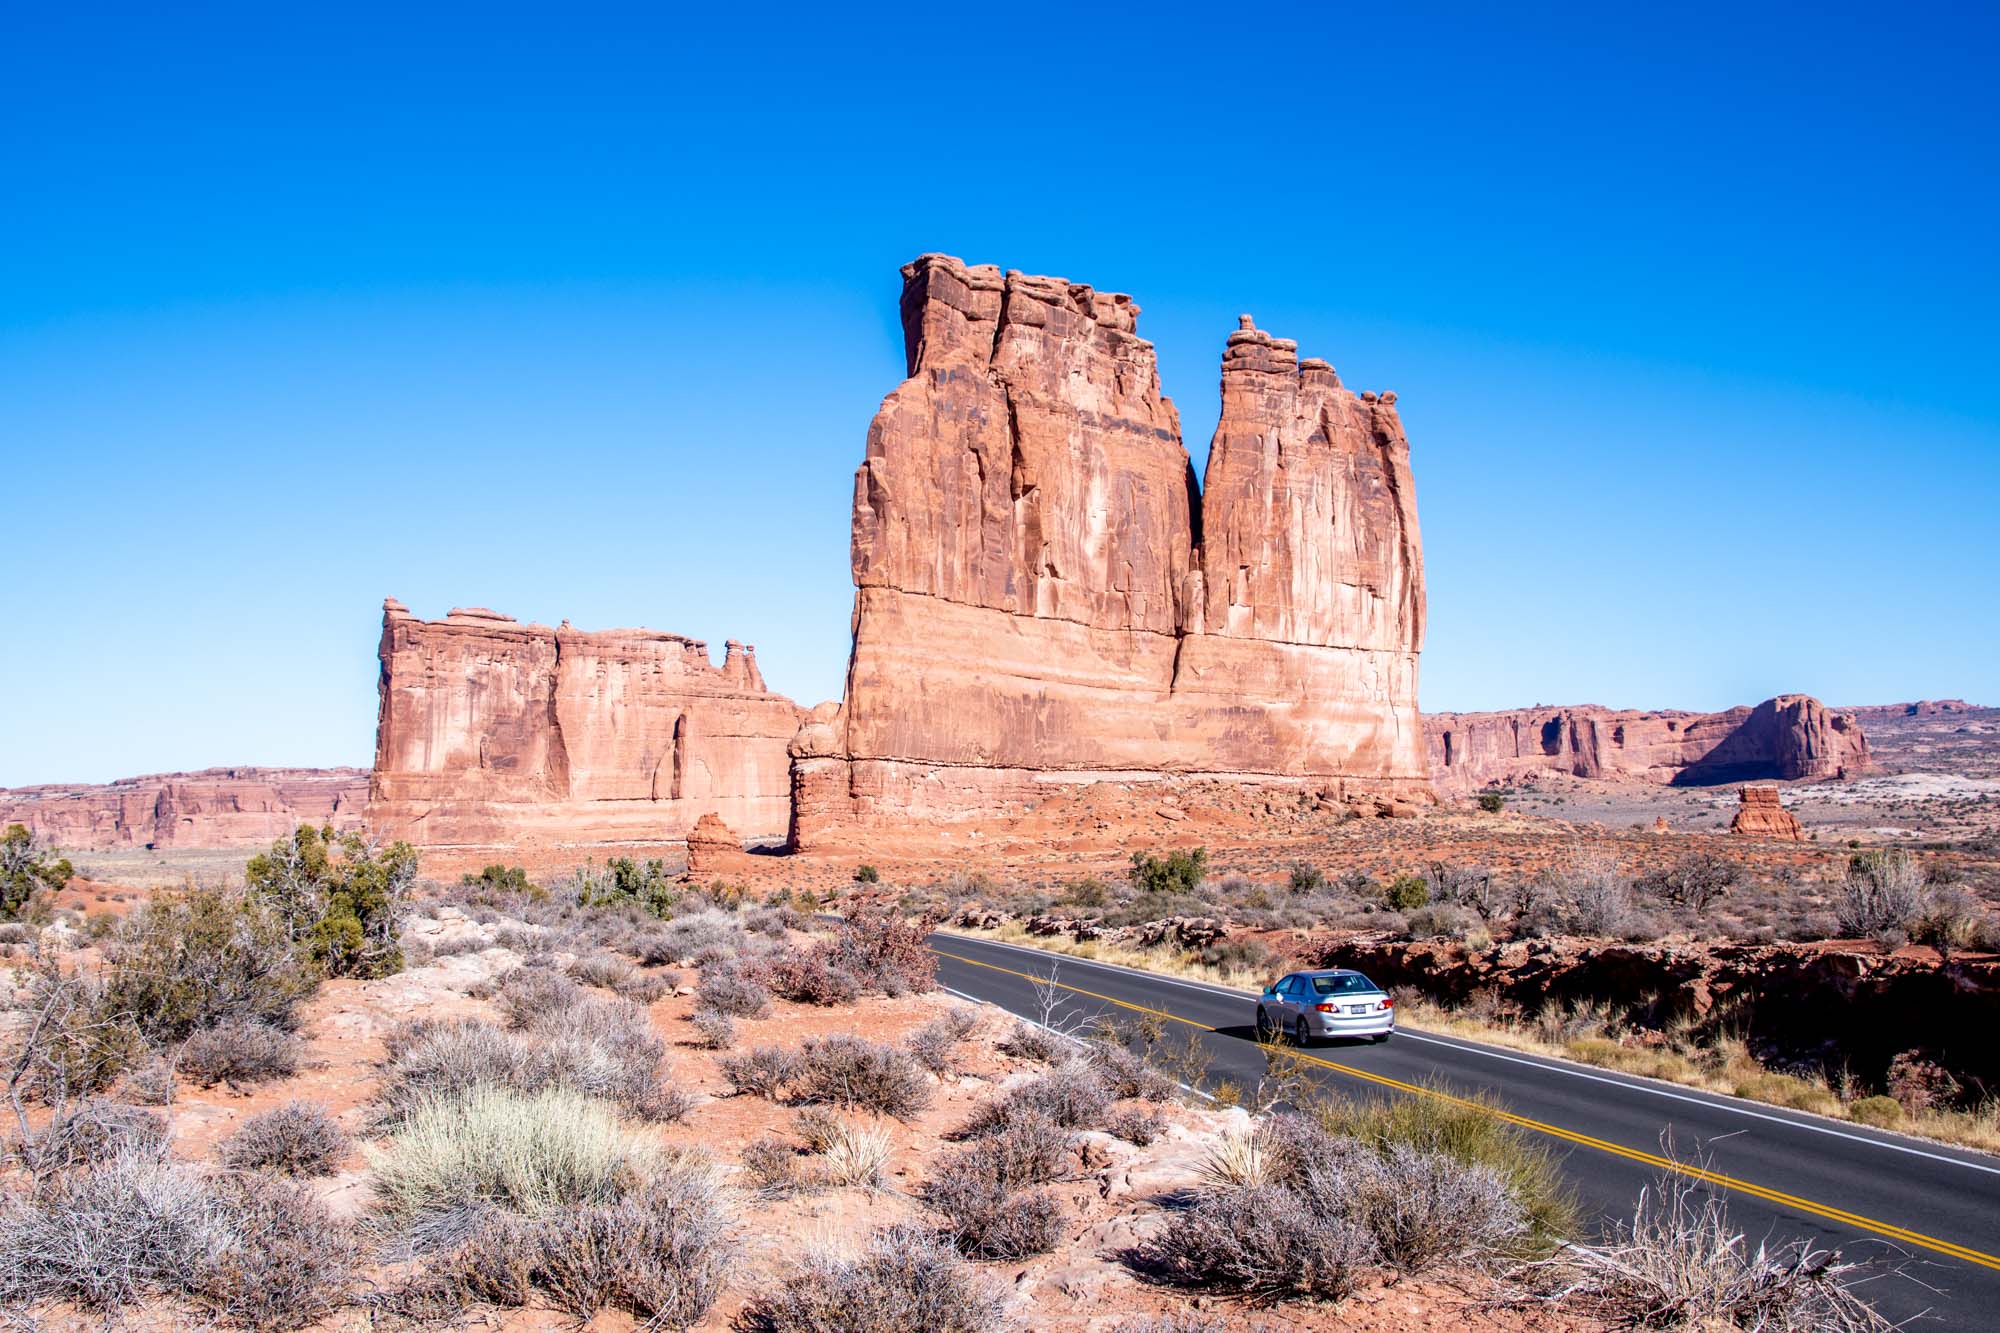 Car on Scenic Drive in Arches NP